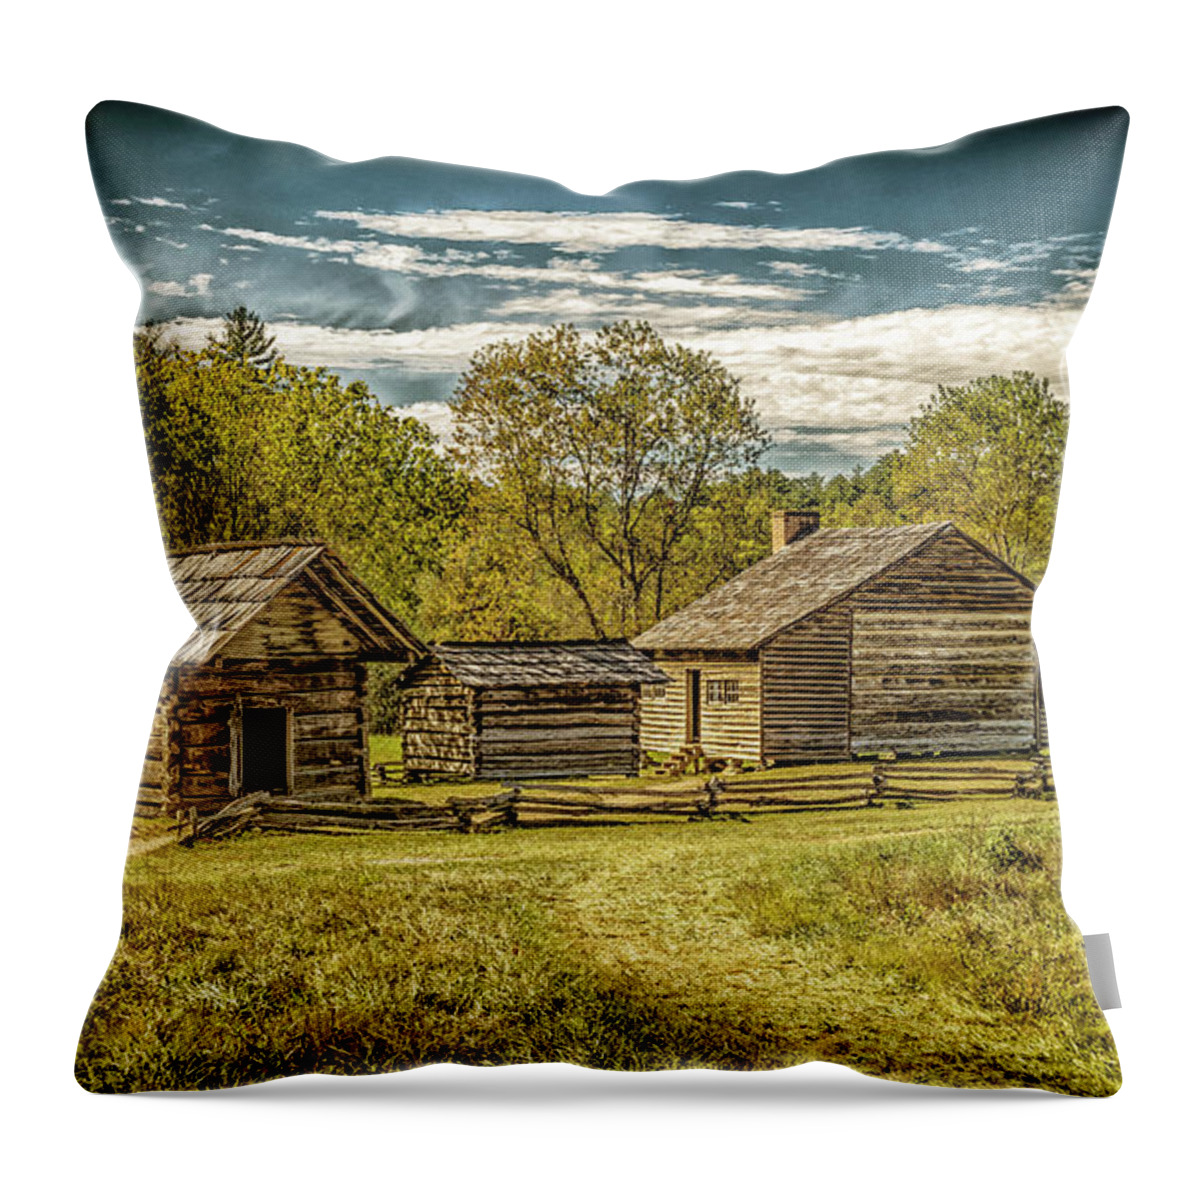 National Park Throw Pillow featuring the photograph The Dan Lawson Place by Nick Zelinsky Jr